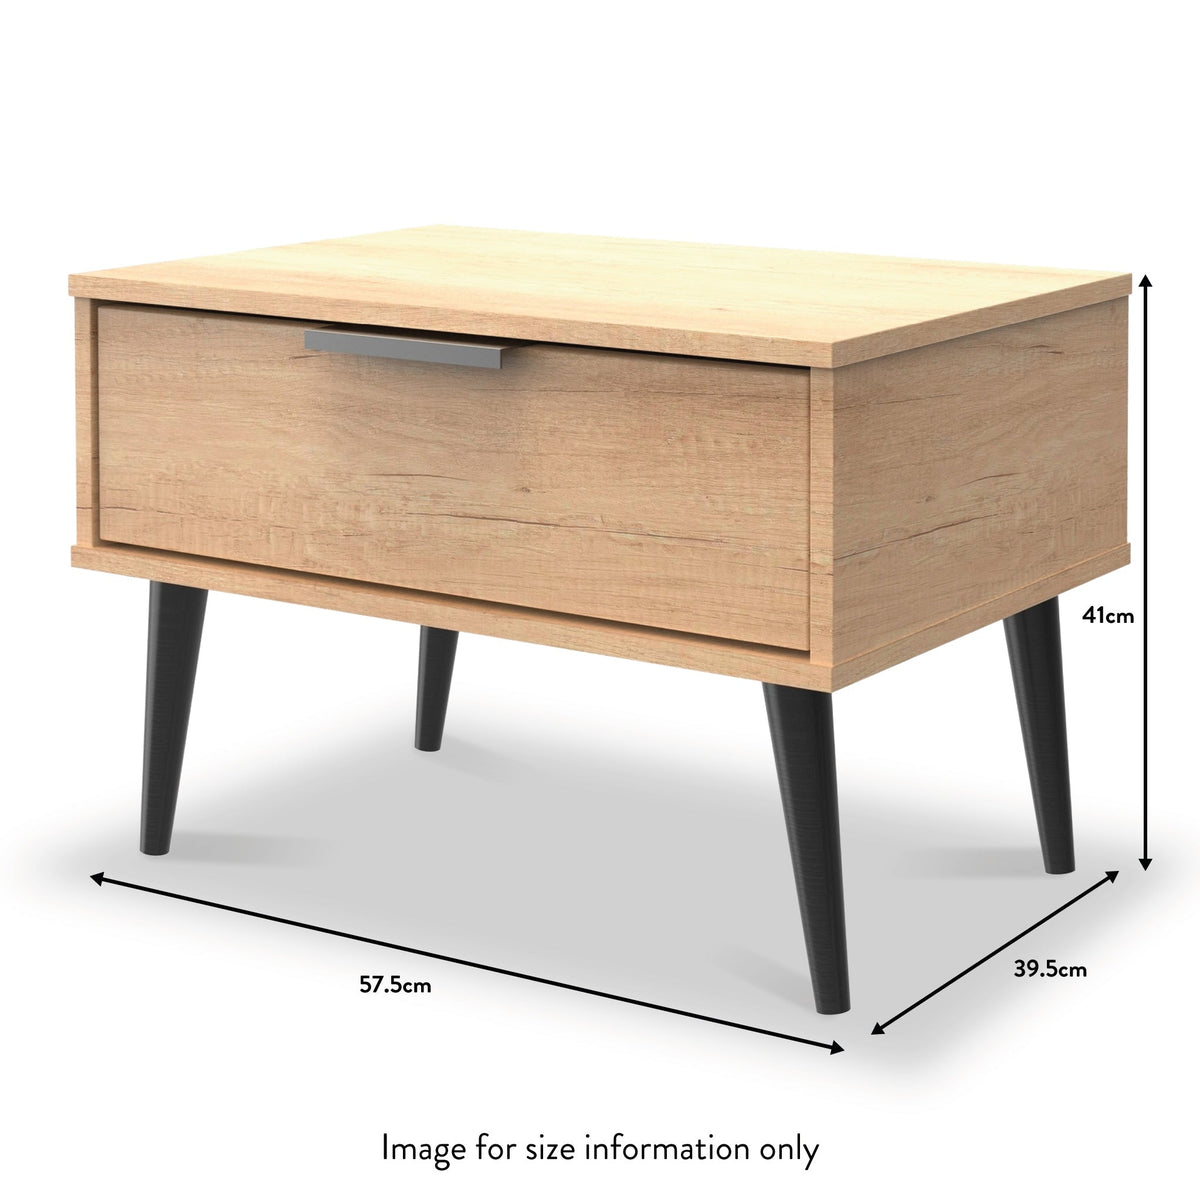 Asher Light Oak 1 Drawer Side Lamp Table with black legs dimensions